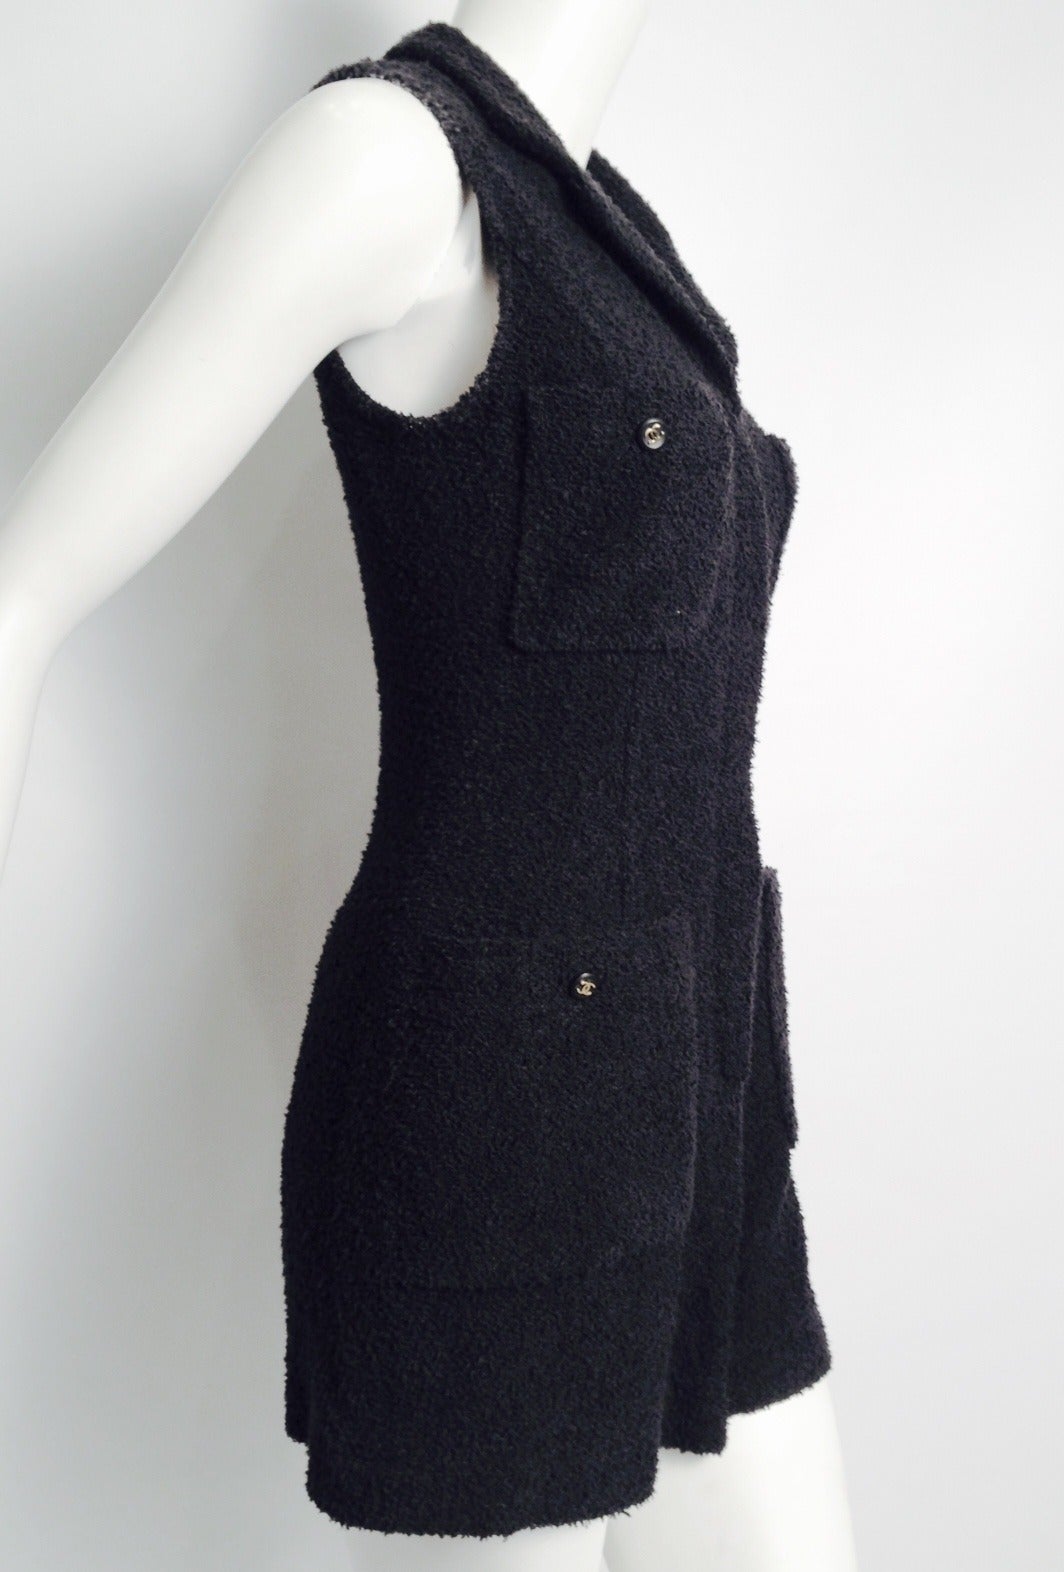 Chanel 1995 Spring Navy Terry Cloth Sleeveless Romper In Excellent Condition For Sale In Palm Beach, FL